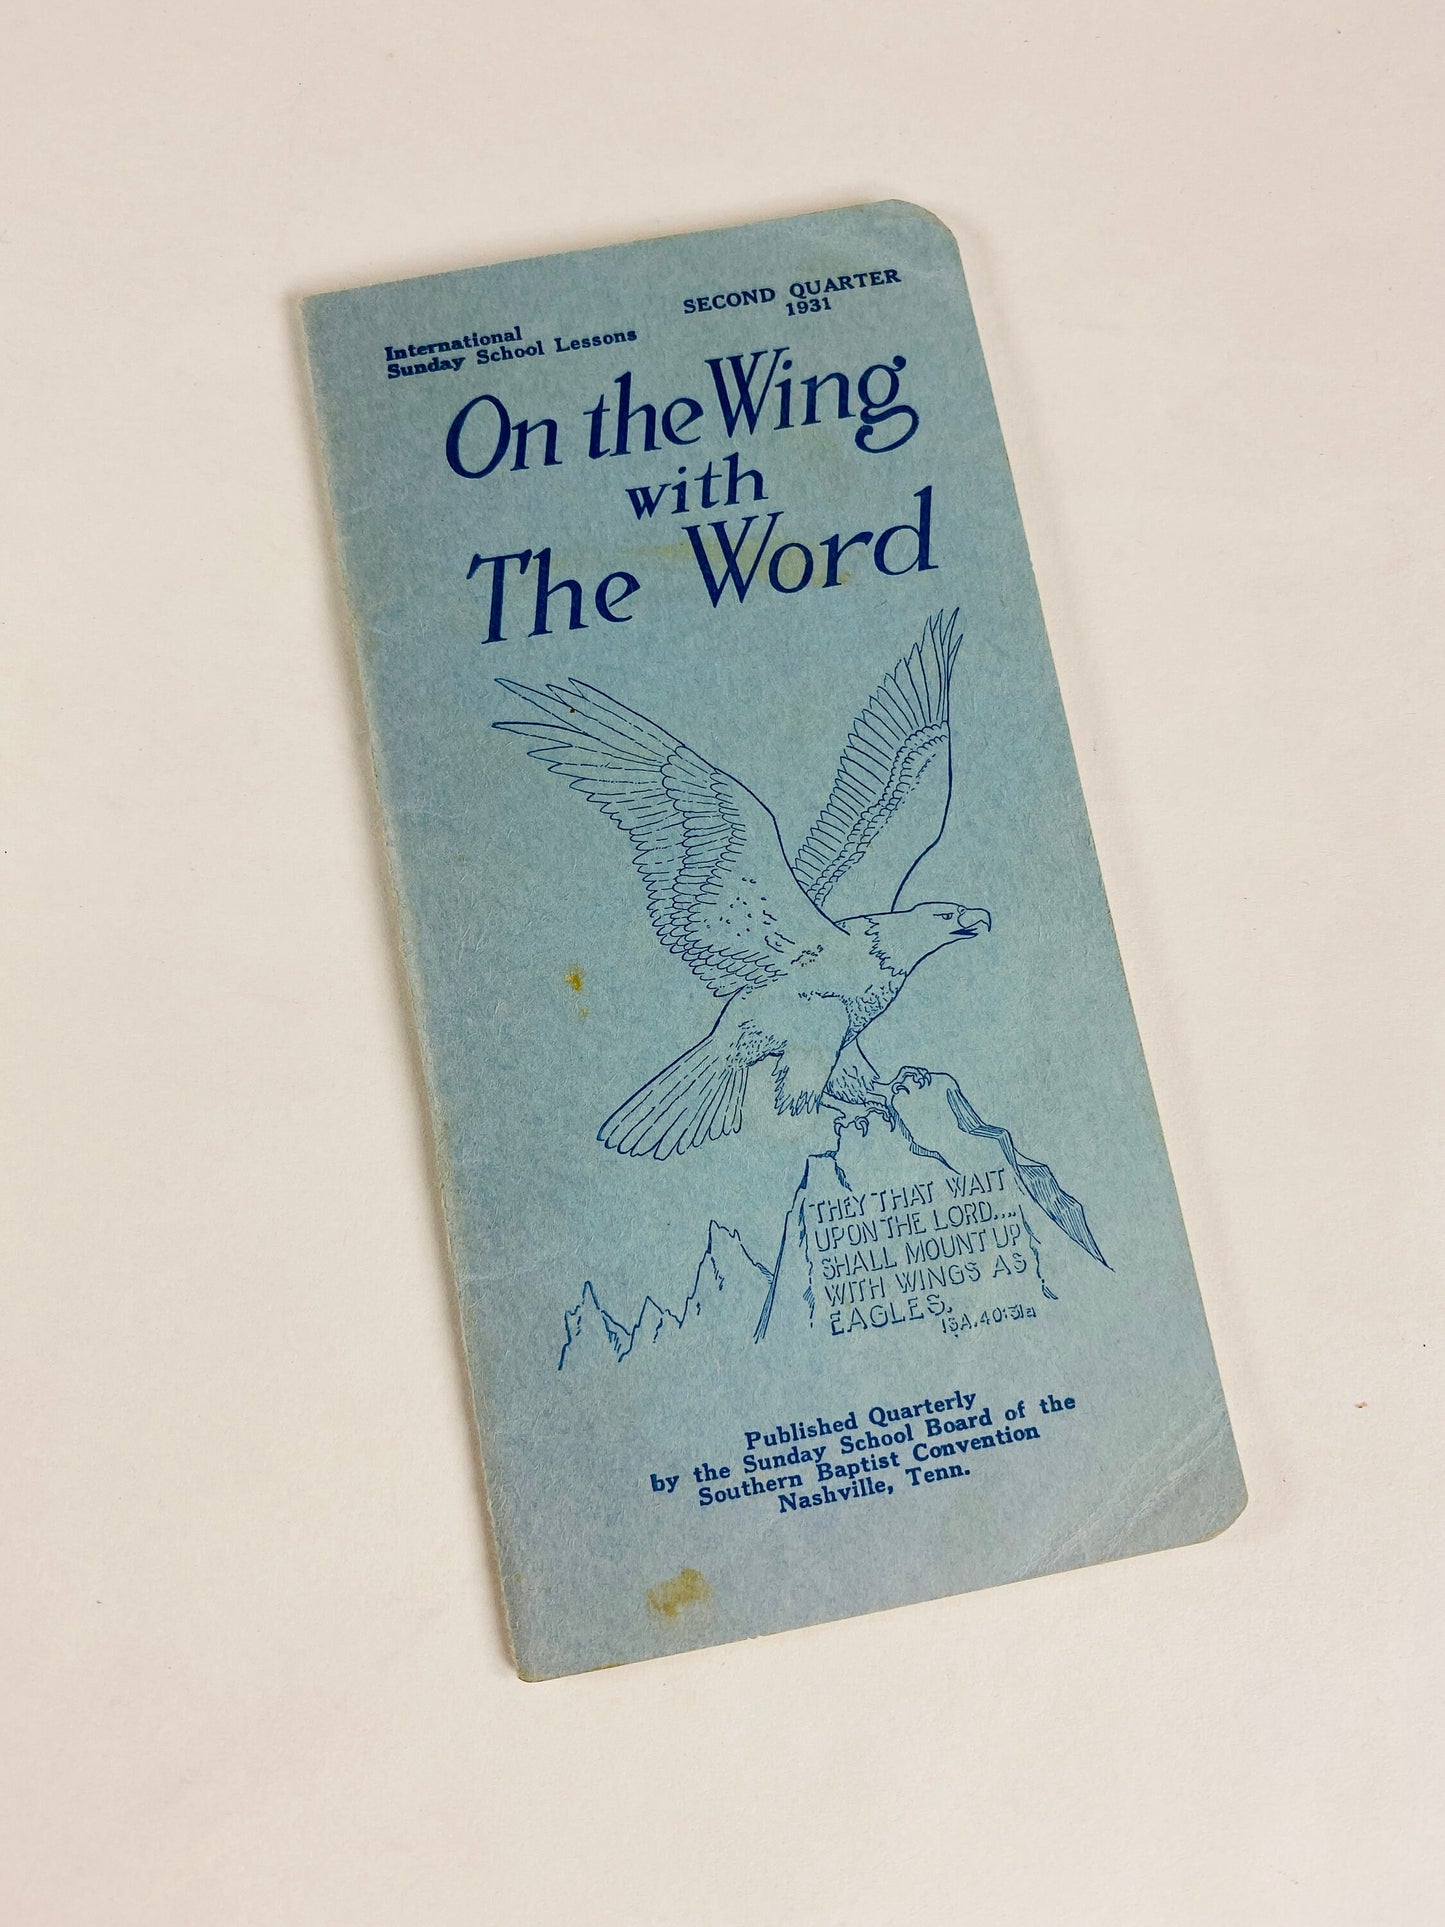 1931 Southern Baptist International Sunday School Lessons On the Wing with the Word vintage paperback booklet quarterly publication